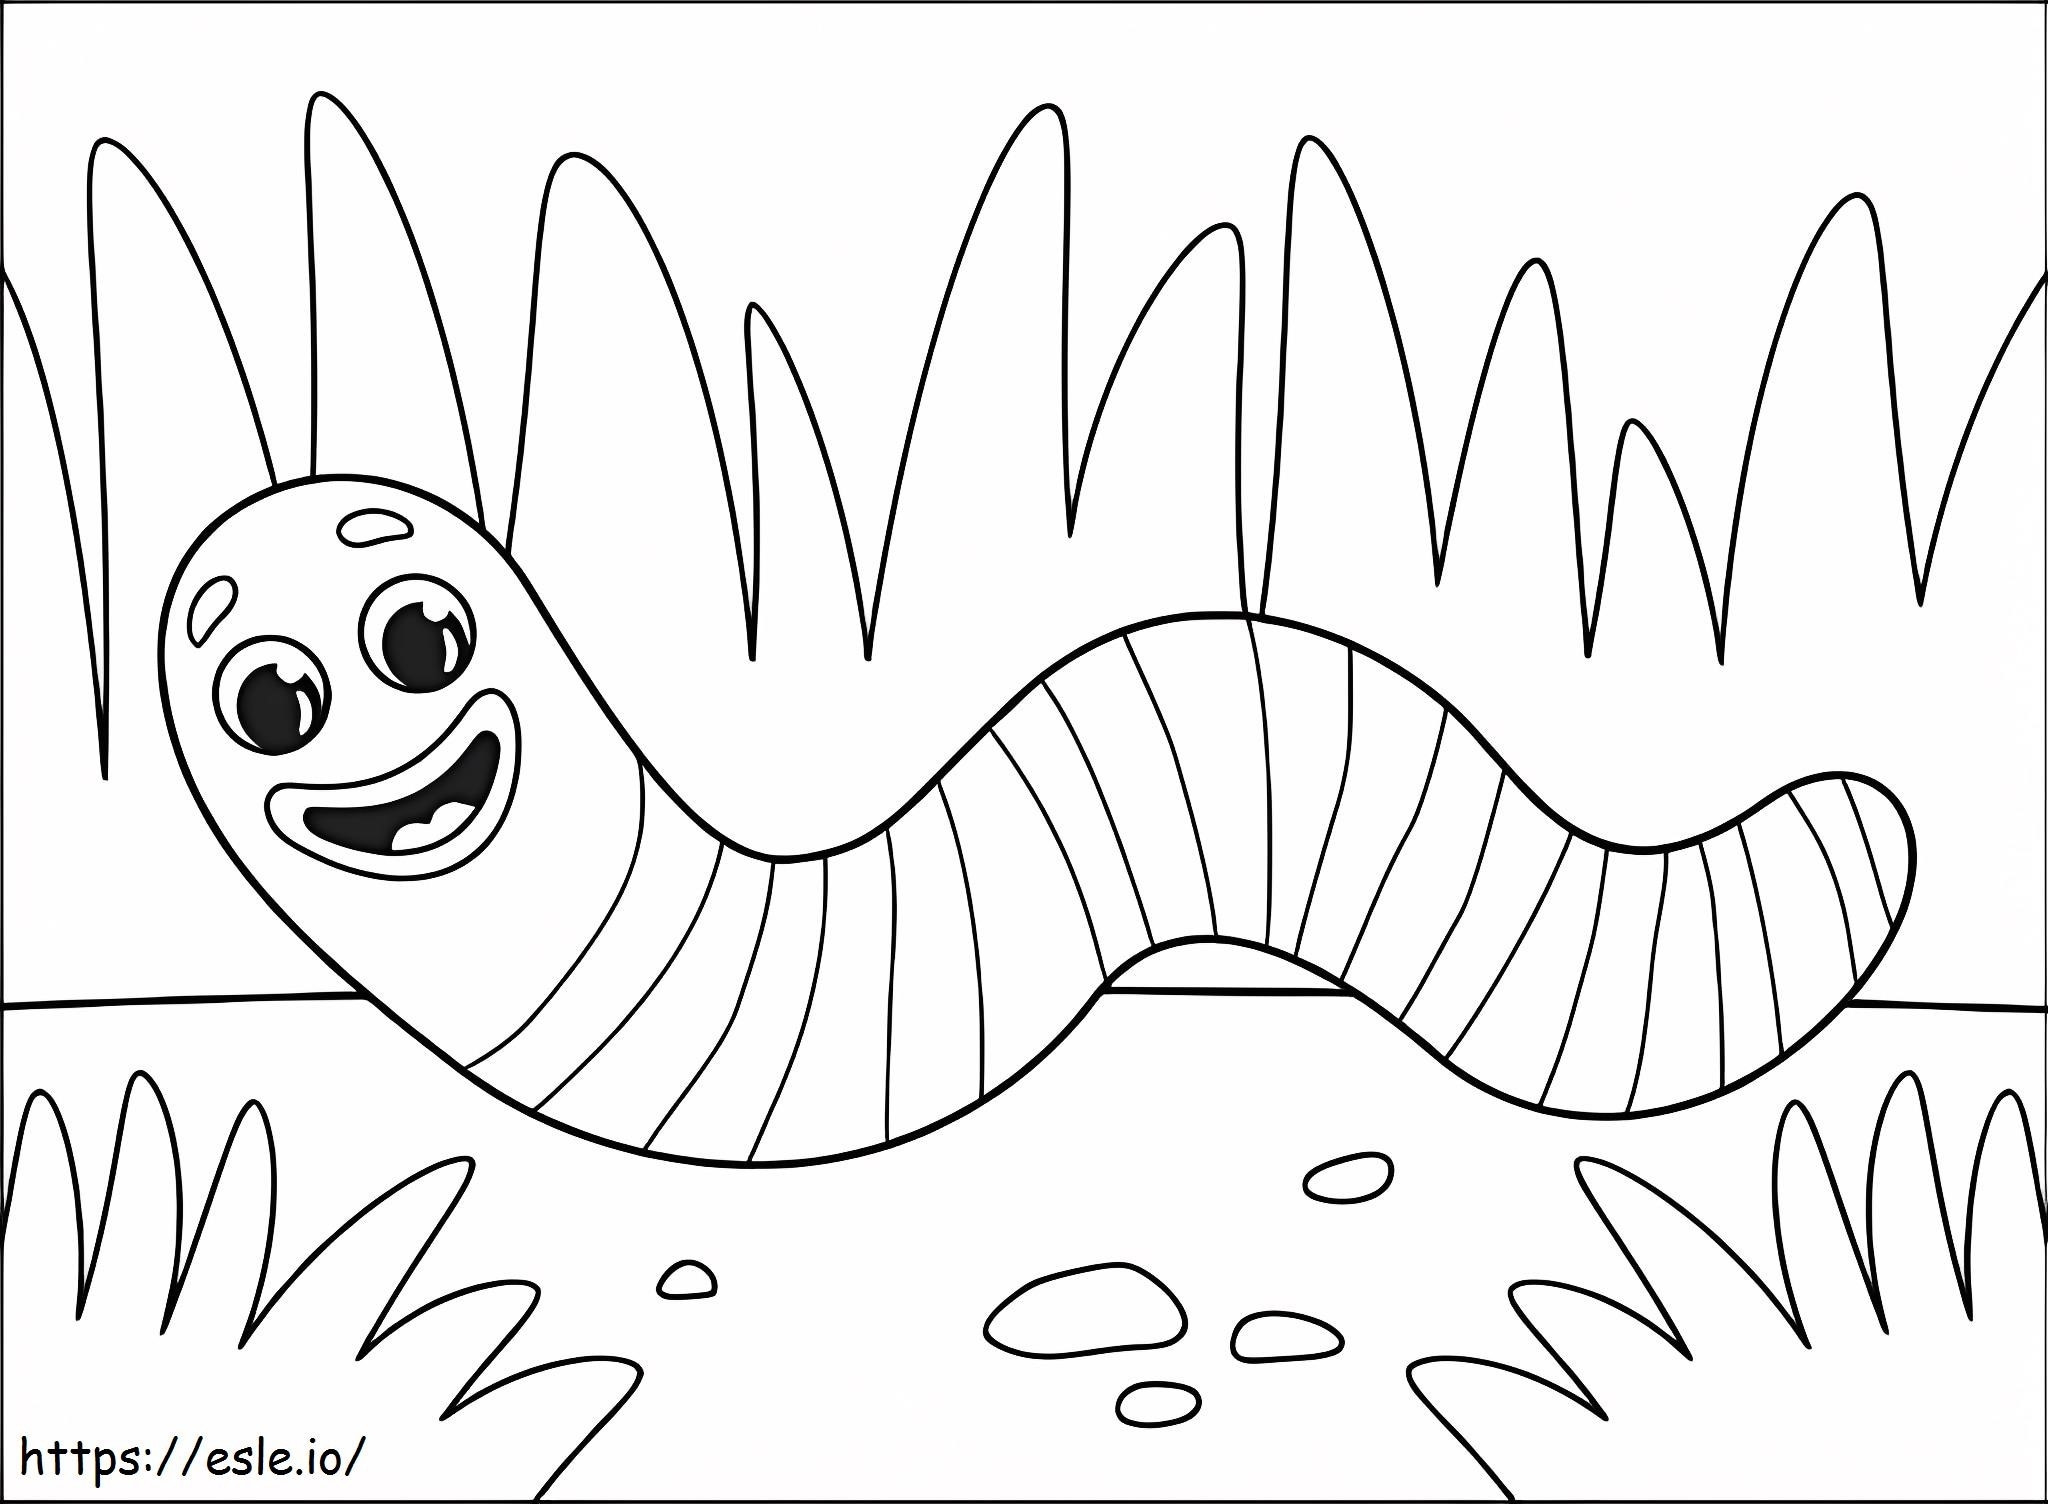 Worm Fun coloring page